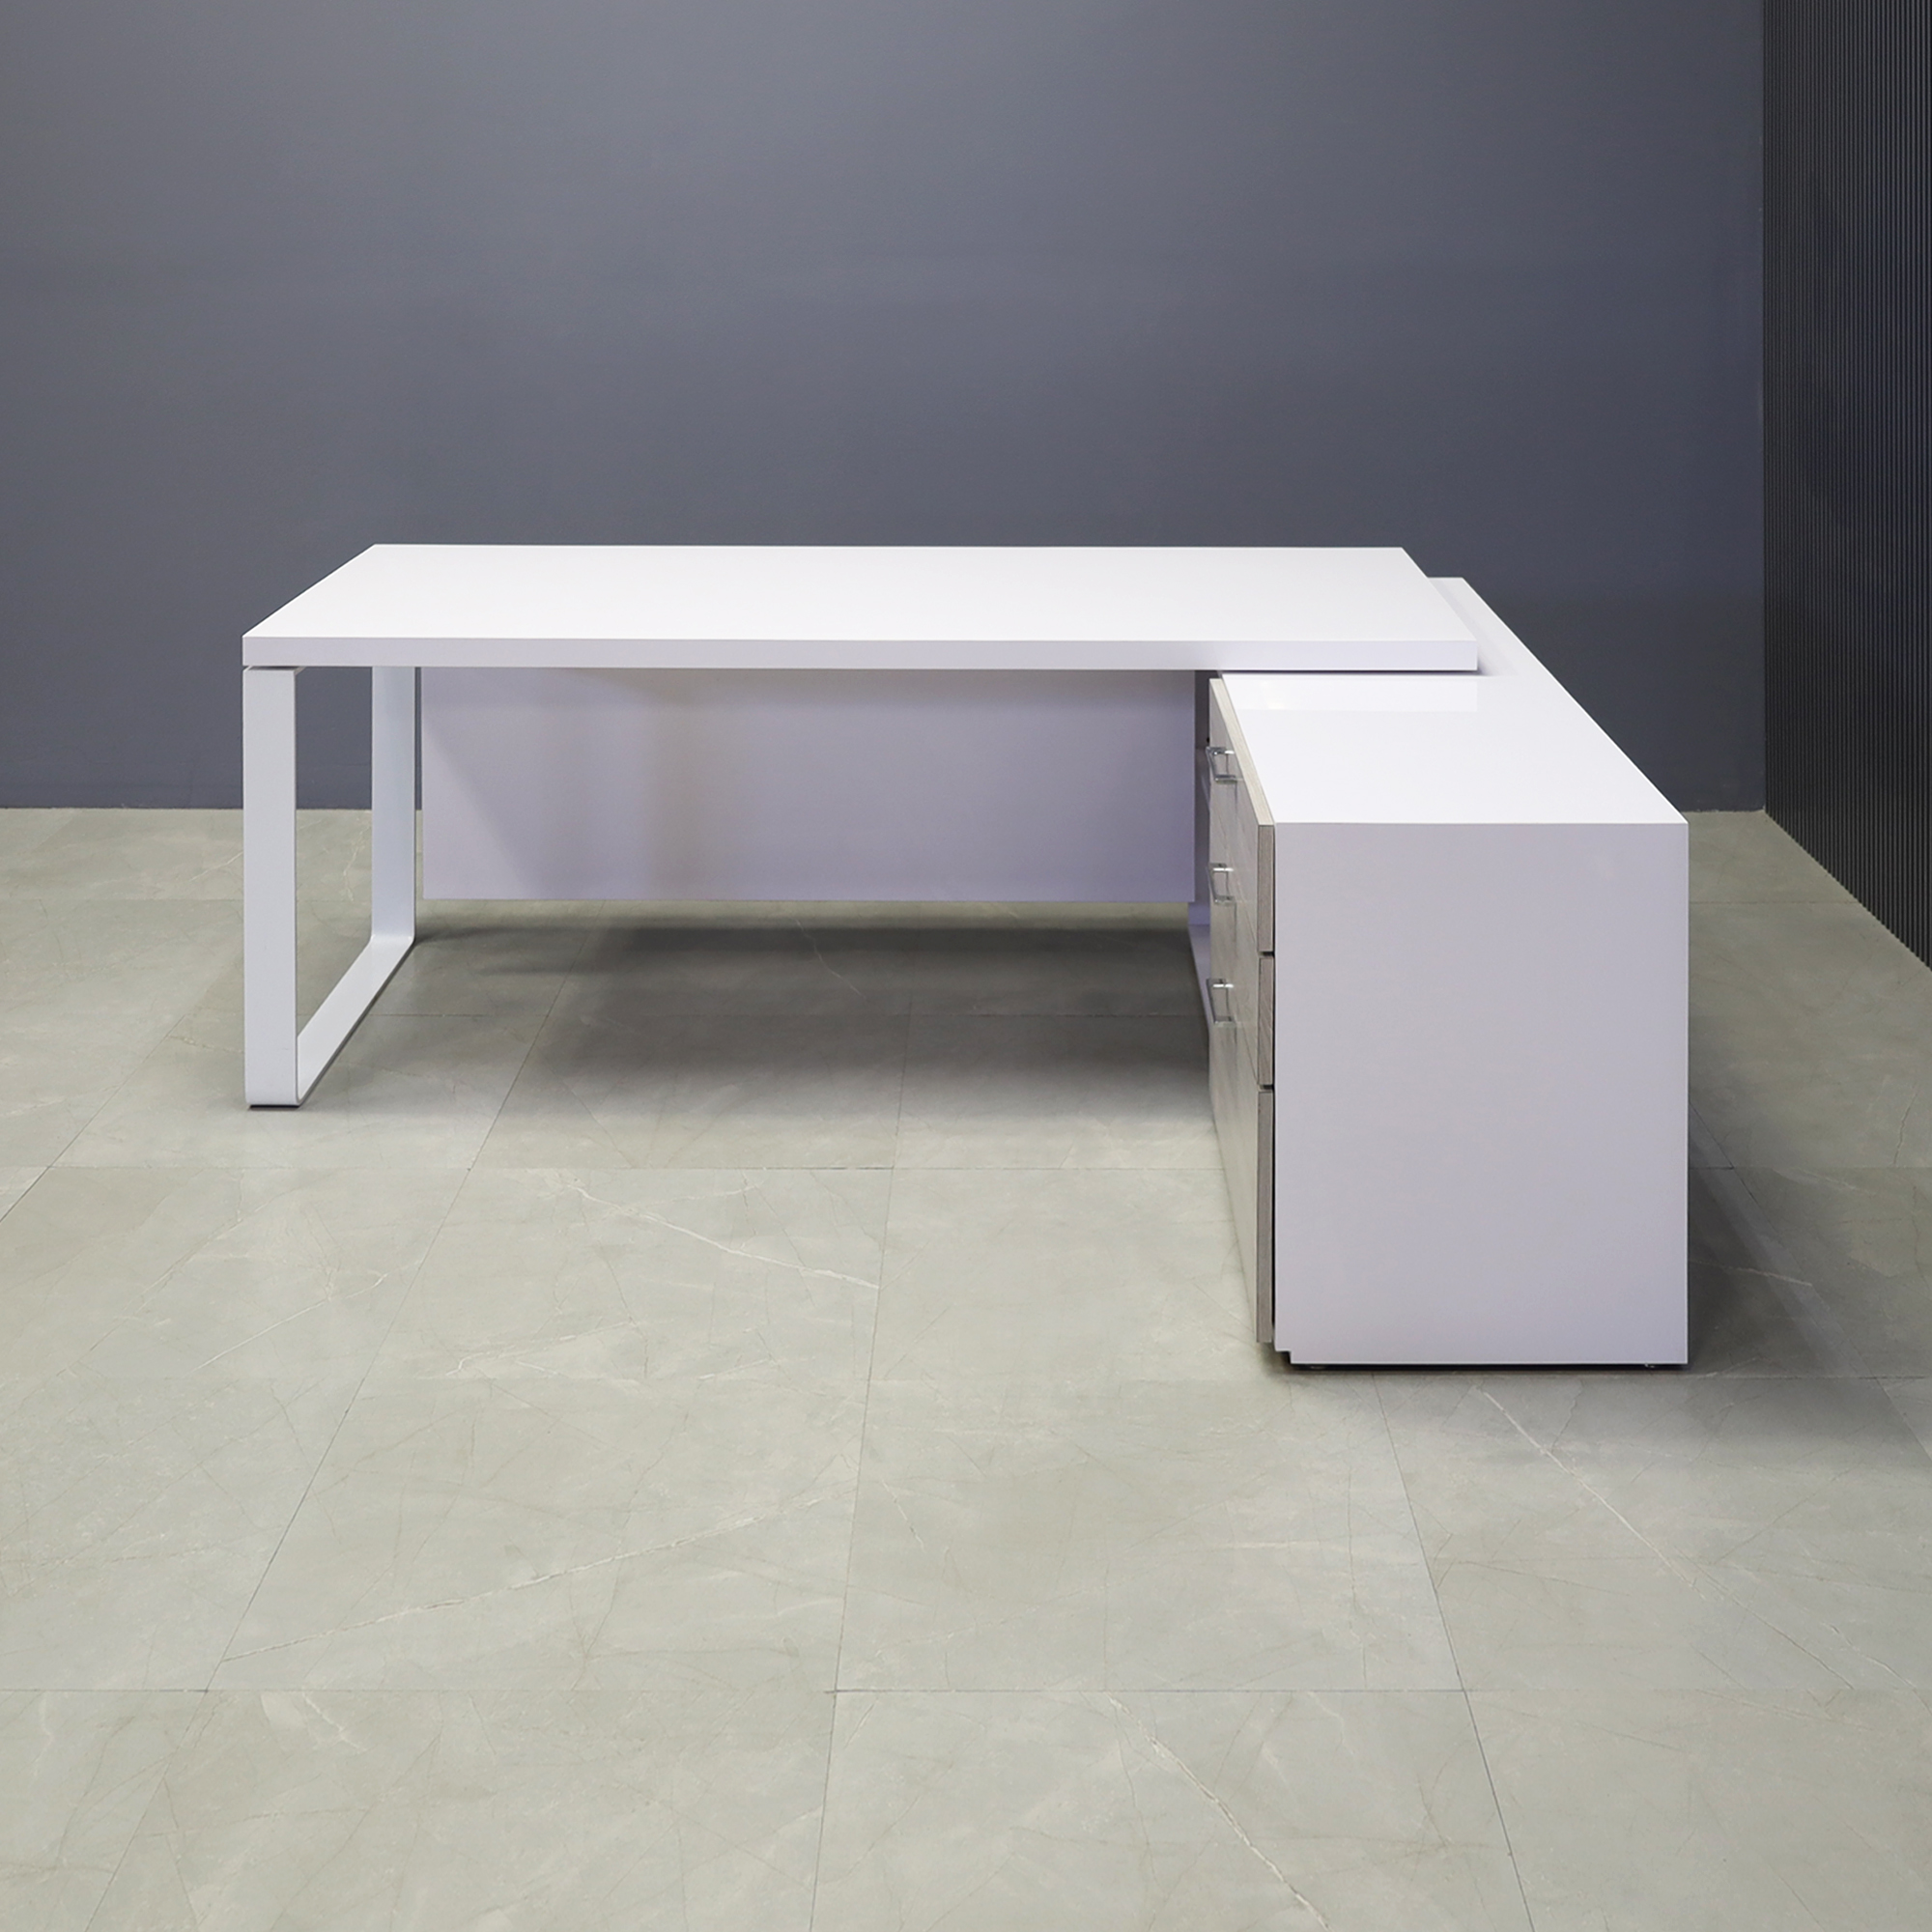 72-inch Aspen Executive Desk With Credenza in white gloss laminate top & credenza, greywood matte laminate privacy panel & front drawers, with white metal leg shown here.